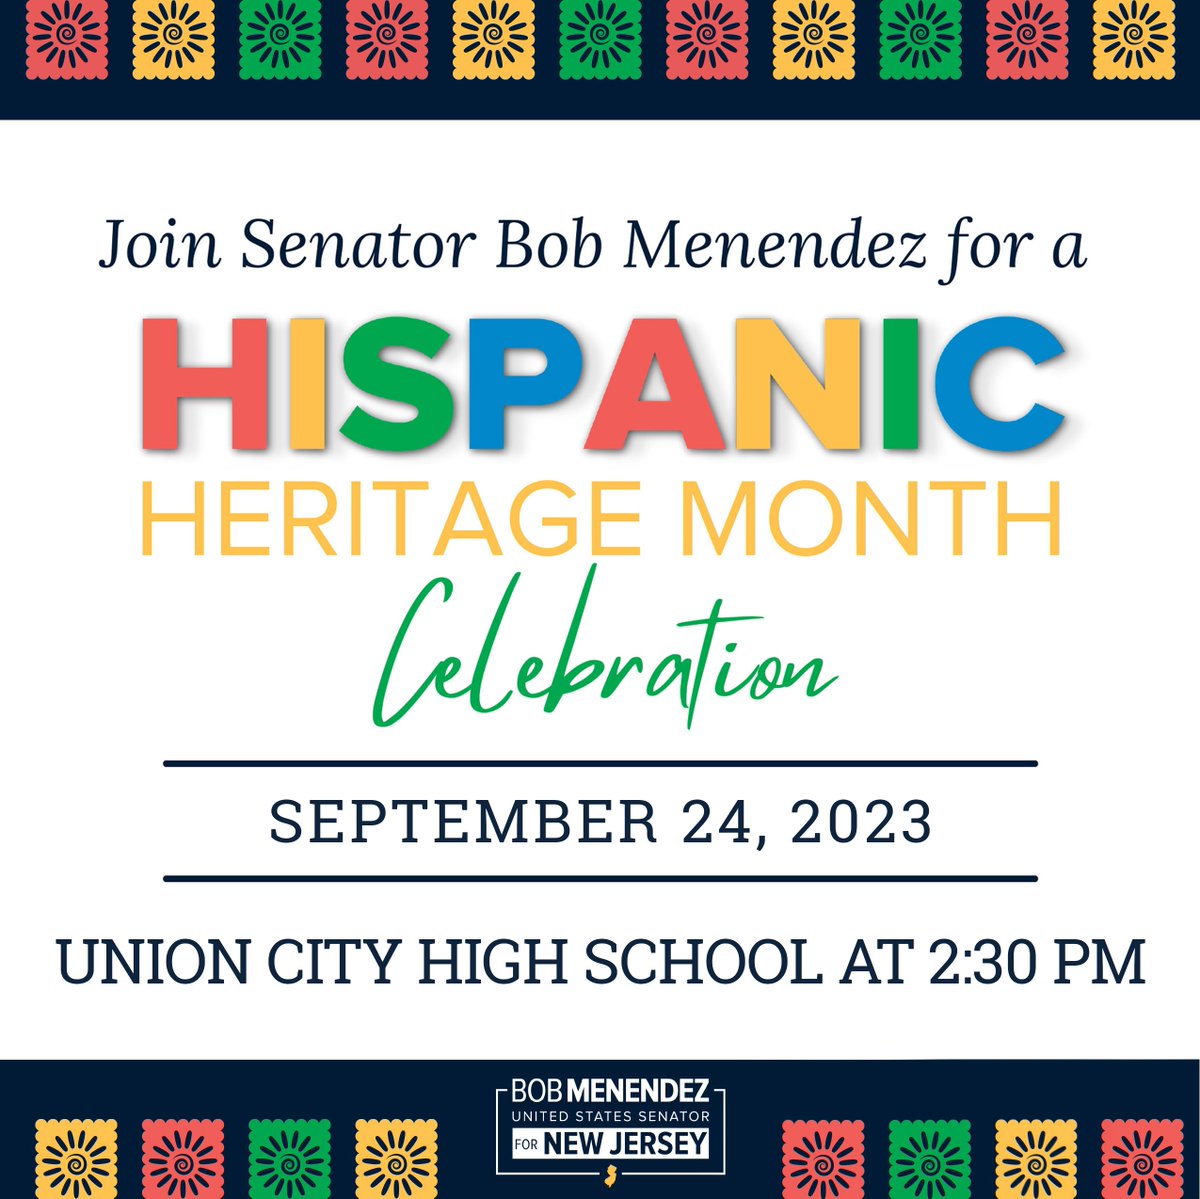 Great news!

A date has been selected for my 13th annual Hispanic Heritage Month celebration! Make sure to keep your calendars clear on September 24th for a terrific event to celebrate and honor the culture and contributions of Hispanic Americans.

RSVP: https://t.co/BwBVbzOWOQ https://t.co/TIX4xR9s1c